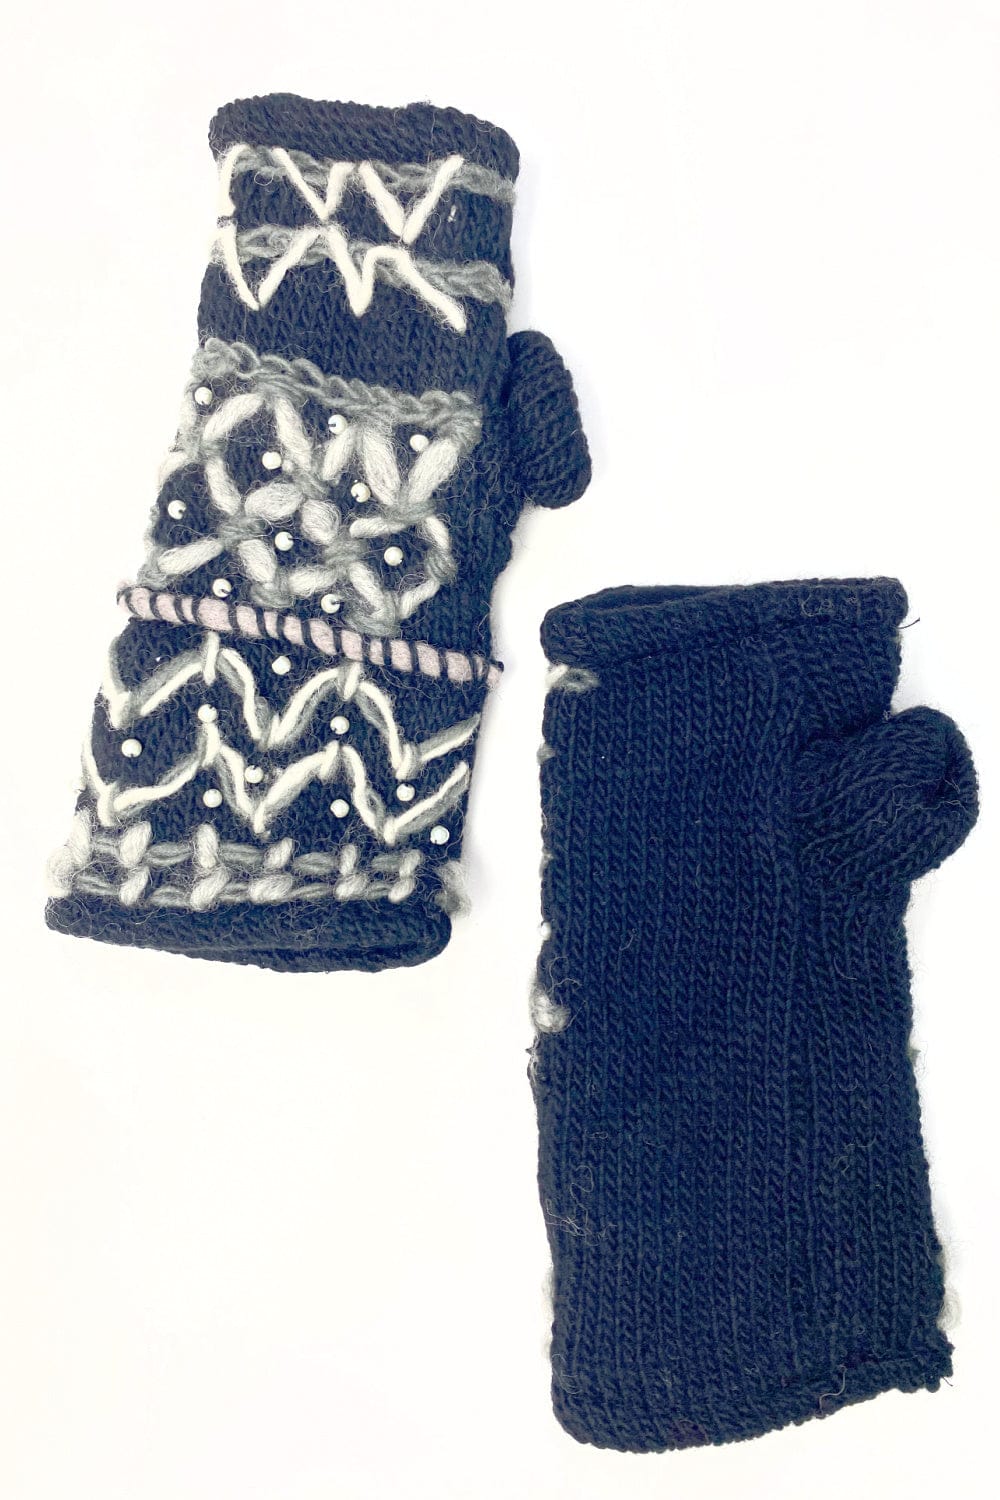 Women's wool fingerless gloves with stitching design and faux pearls.